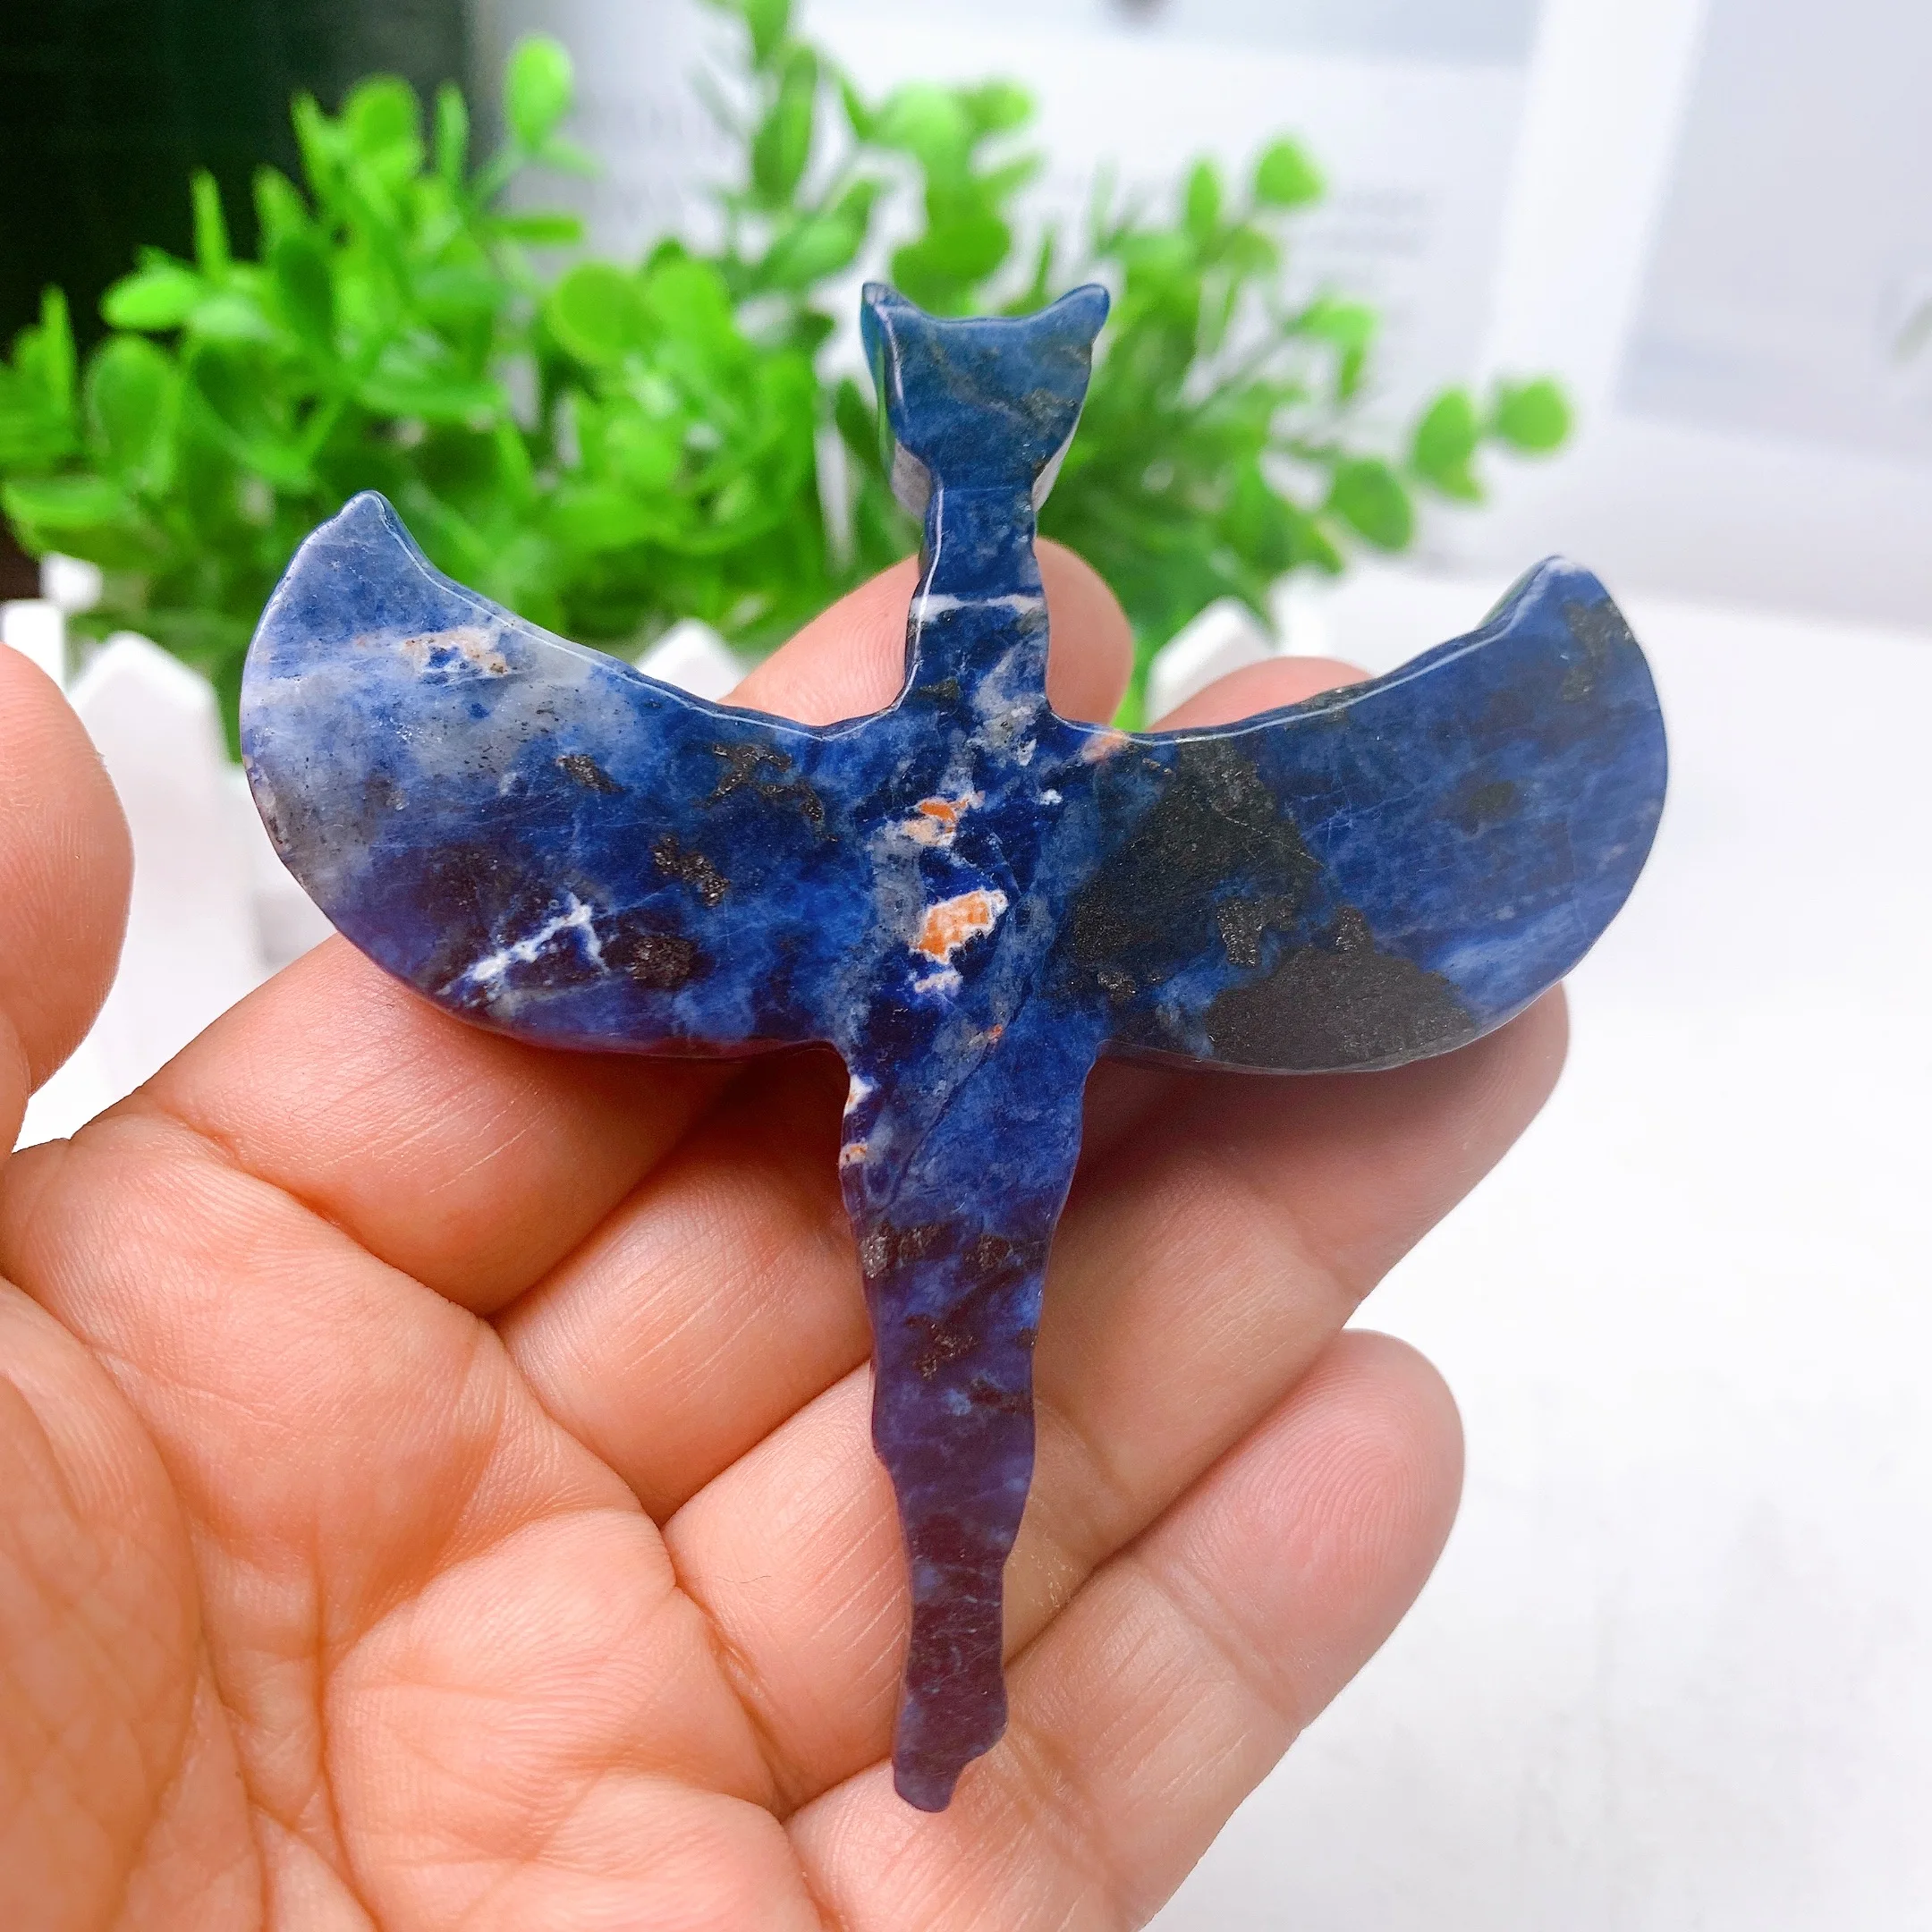 Natural Blue Sodalite Angel Goddess Cross Figurine, Small Healing Crystal Gemstone, Carved Sculpture, Collection Gift, 8cm, 1Pc